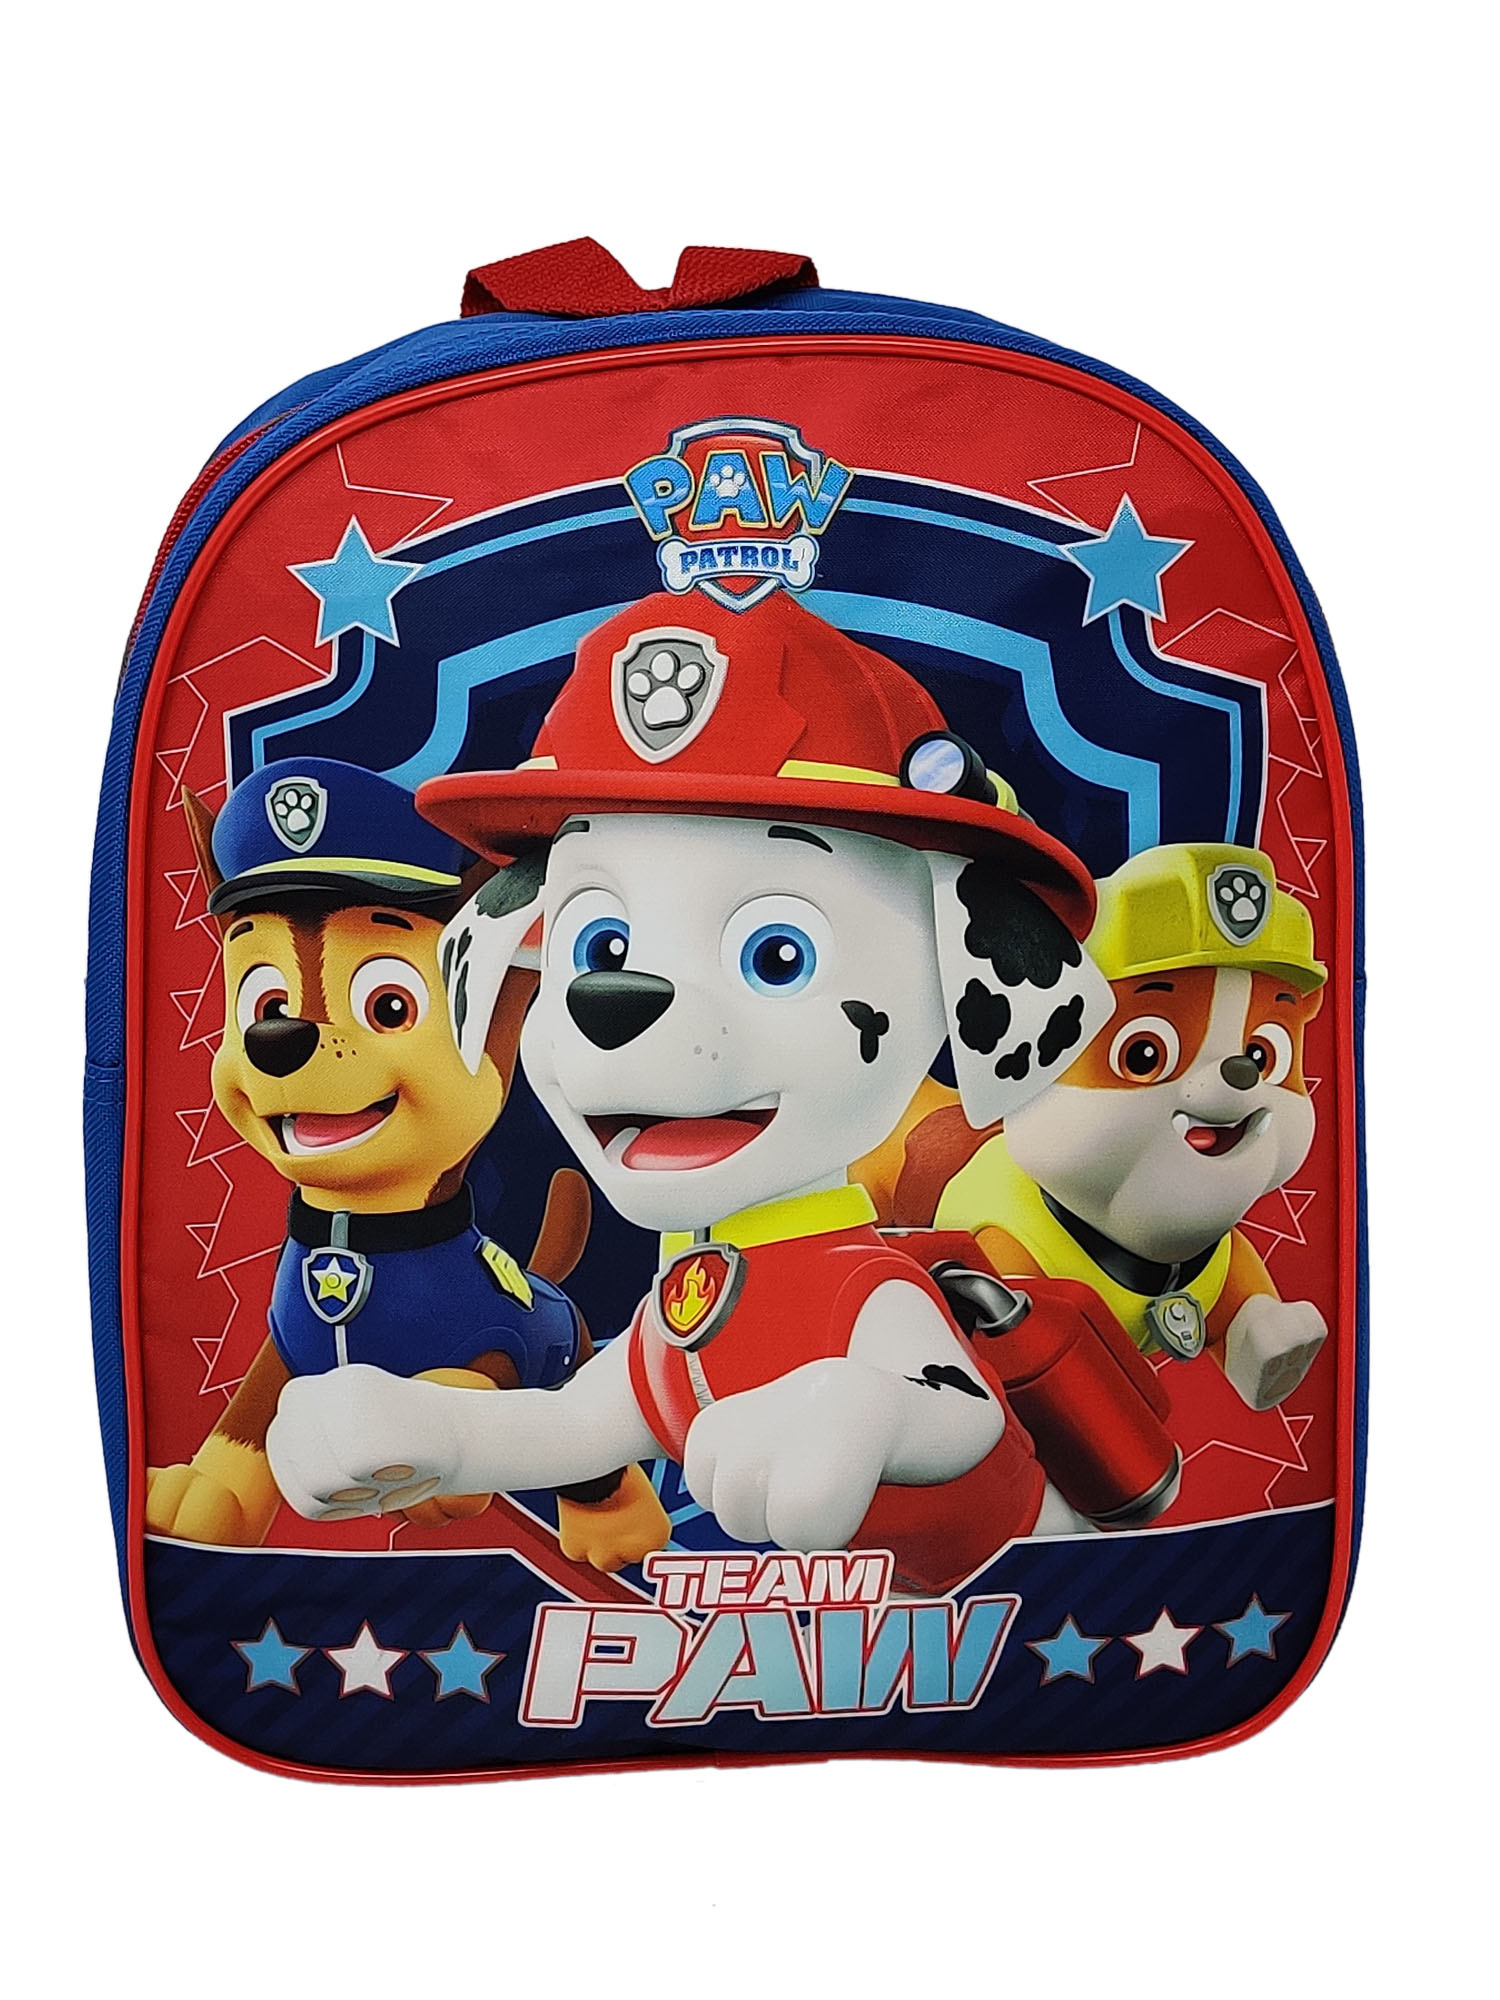 Paw Patrol Backpack 12" Mini Toddler Marshall Chase Rubble Boys Blue Red - image 1 of 3